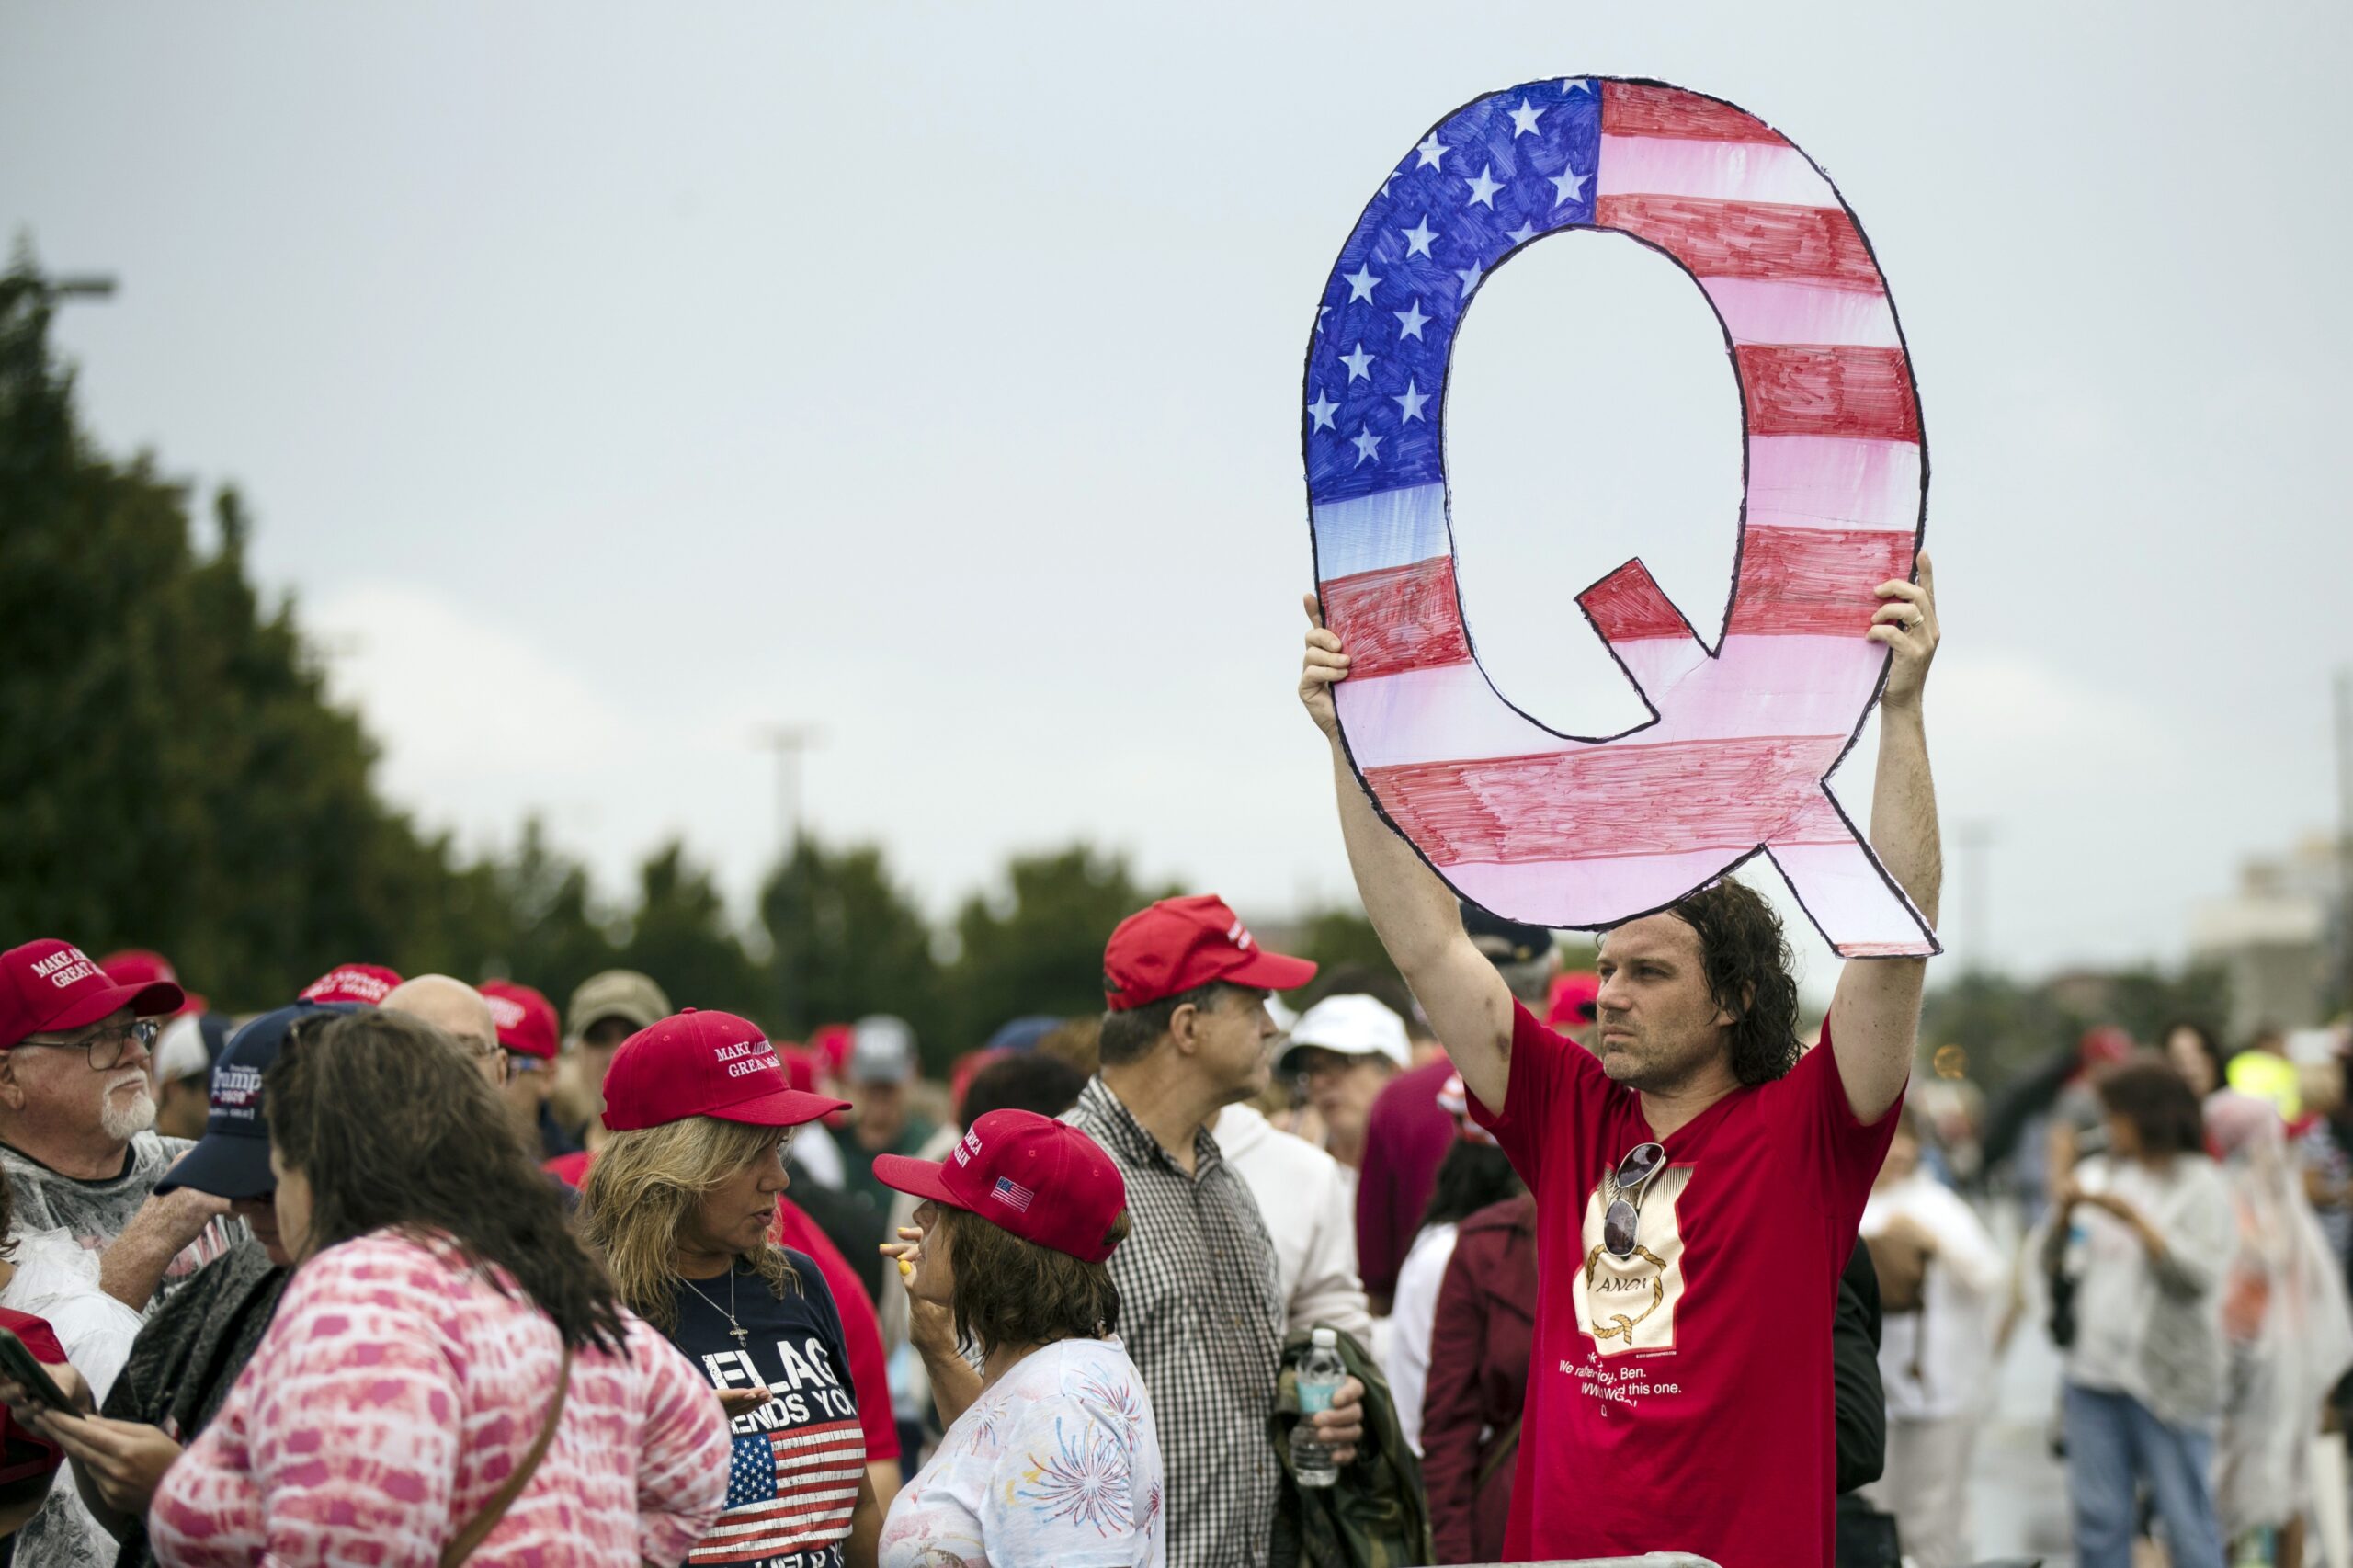 A man holding a Q sign at a Donald Trump rally